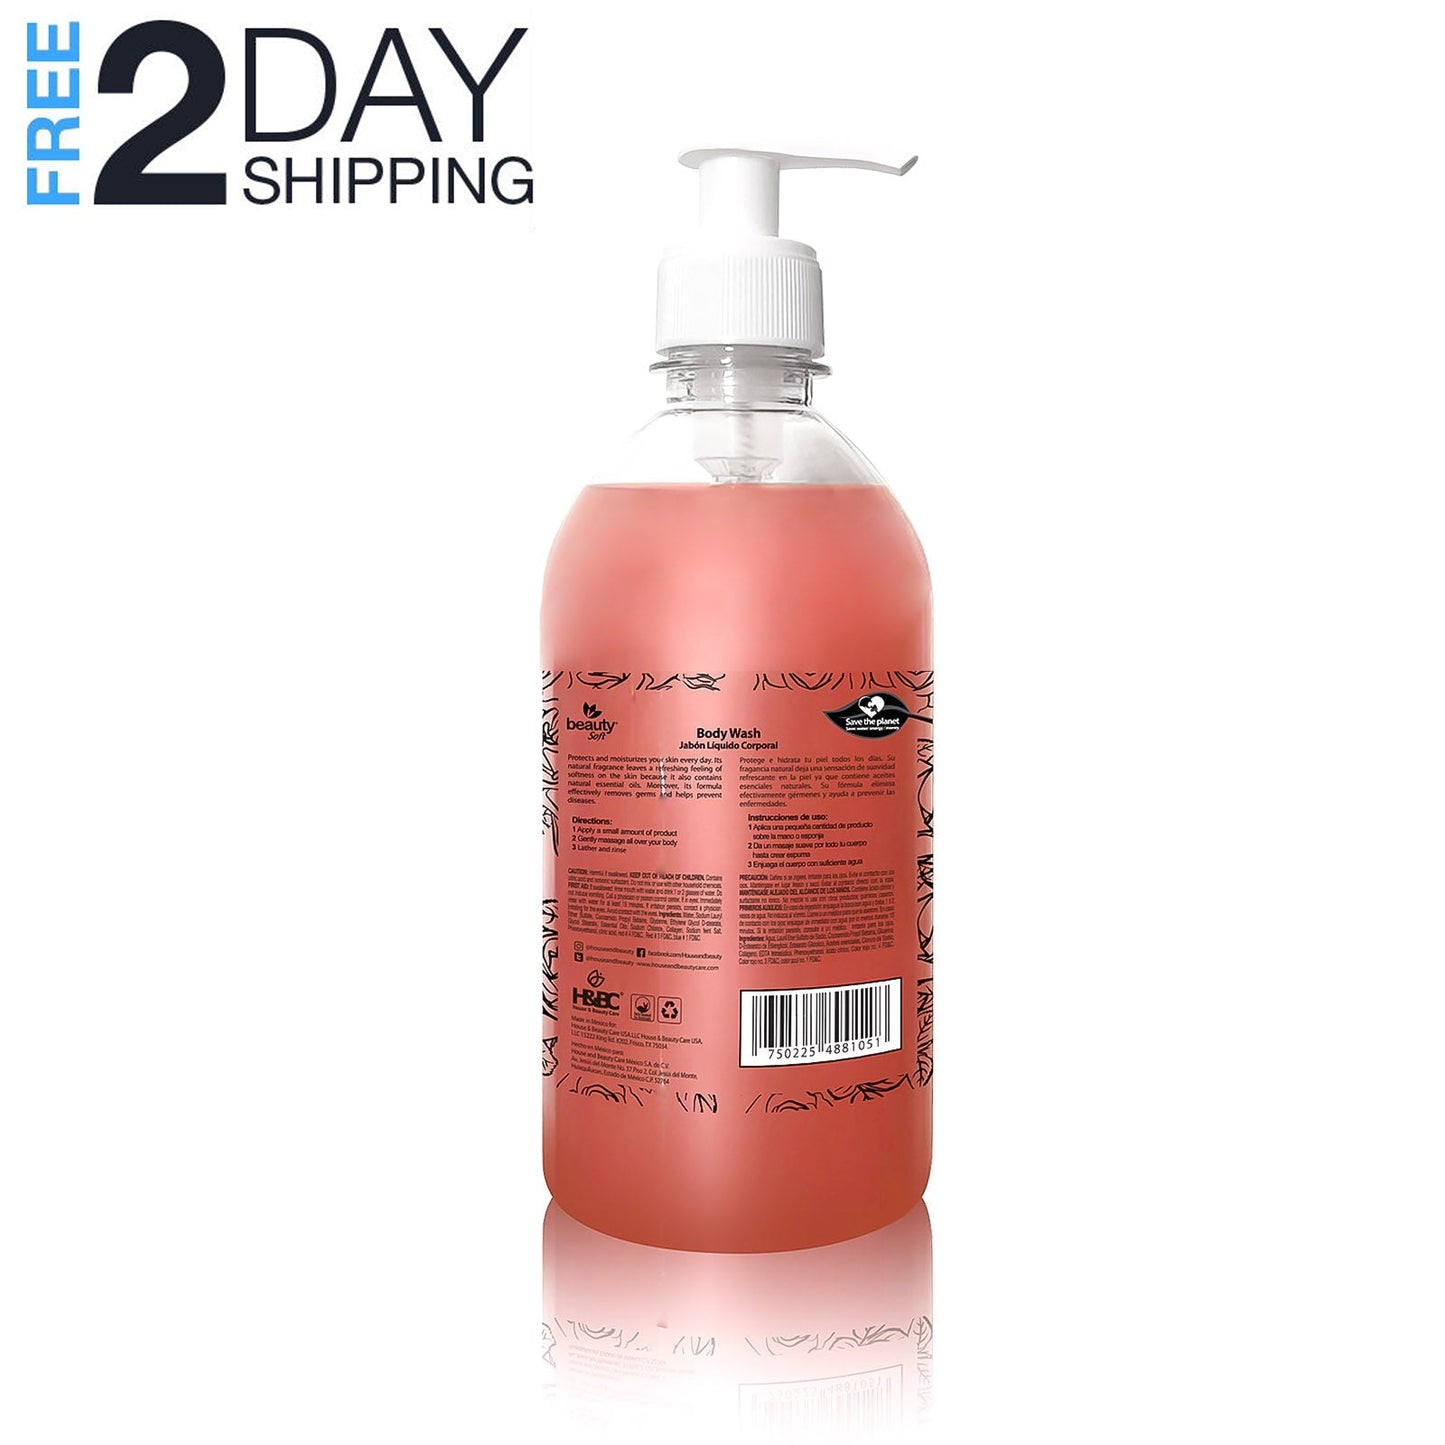 (2 Pack) Beauty Soft Body Wash with Pump Antibacterial Moisturizing, - USA Medical Supply